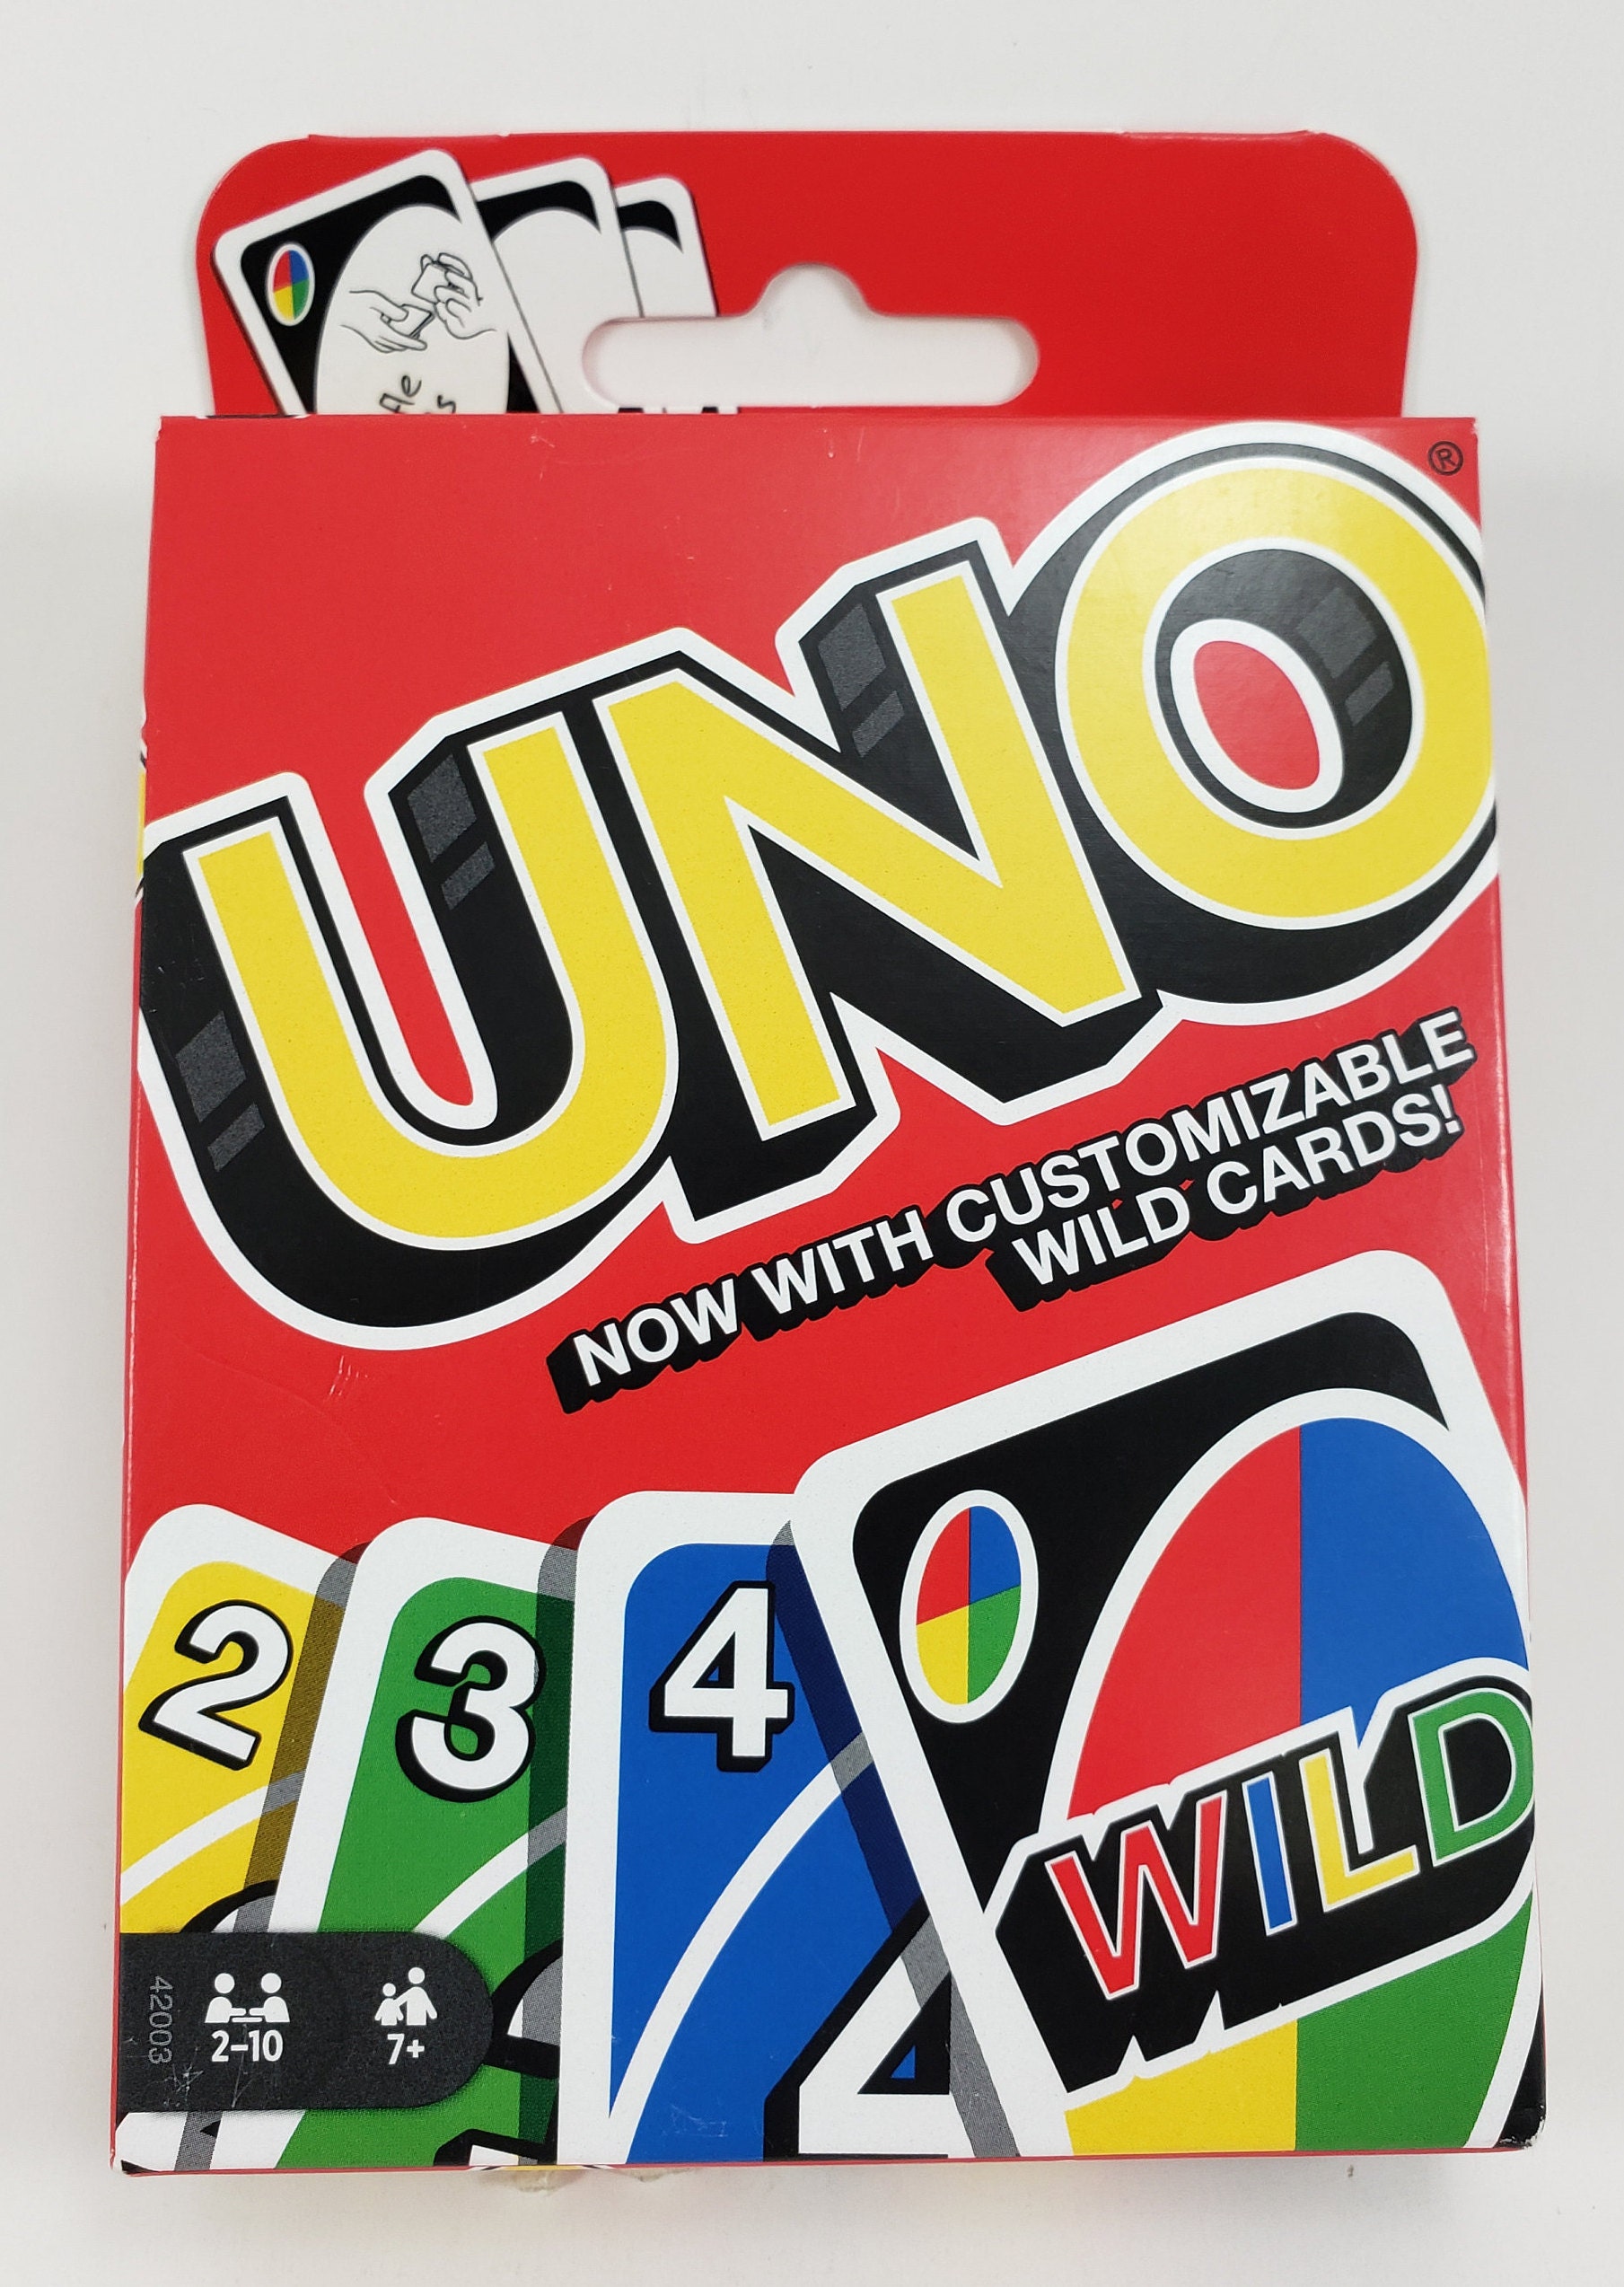 UNO-Wild Mattel Games Uno Family Card Game Genuine Party Creative  Entertainment Board Game Cards Puzzle